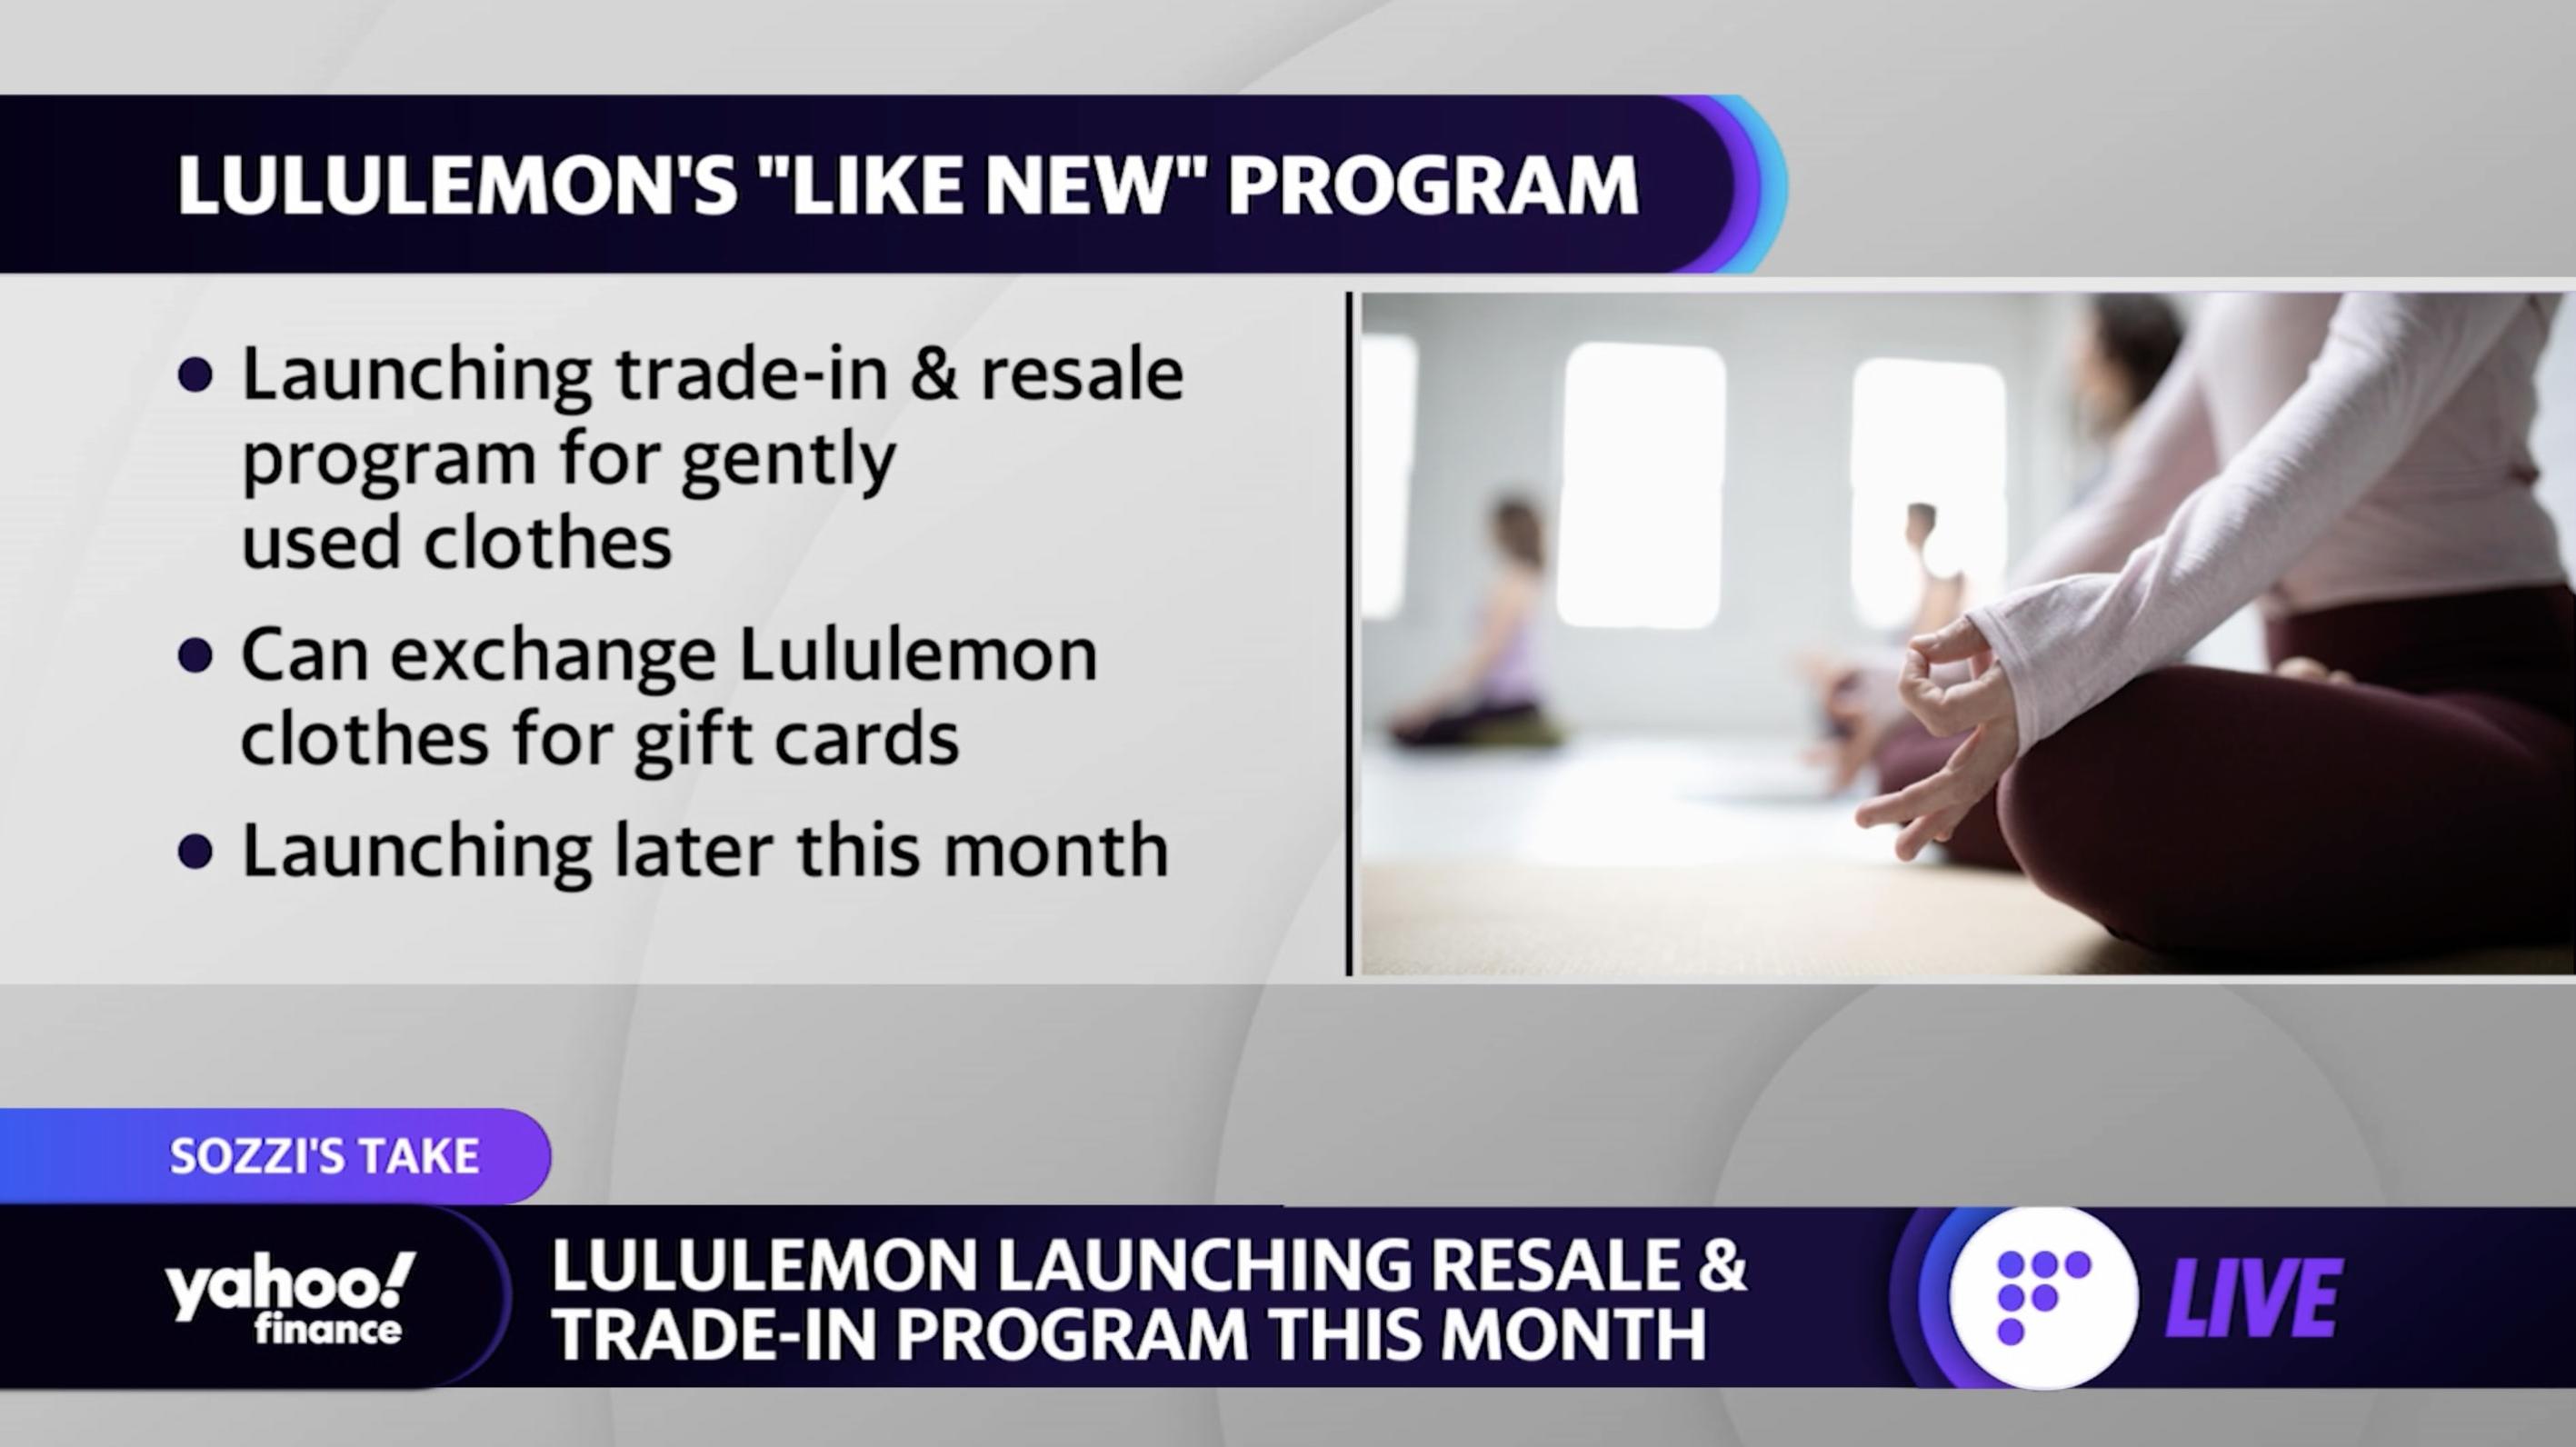 Lululemon Like New: What to Know About Lululemon's Resale Program